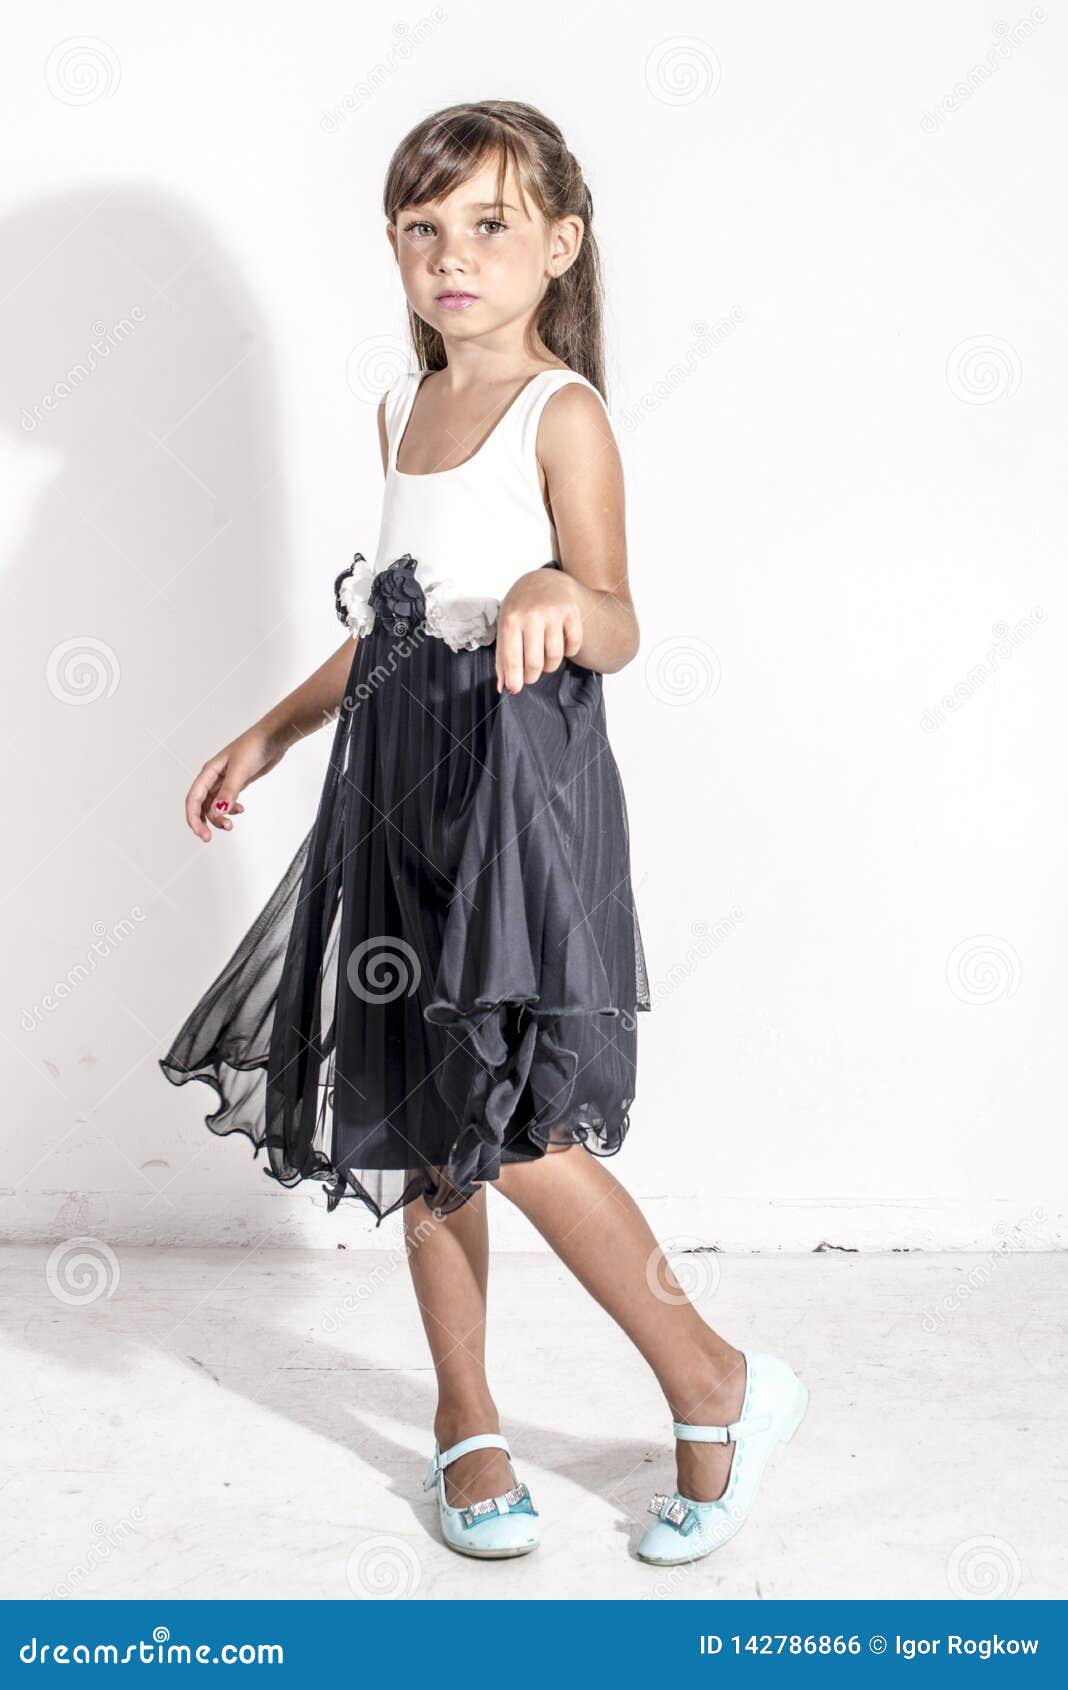 Young Girl Child in a Black and White Festive Dress with Brunettte Hair ...